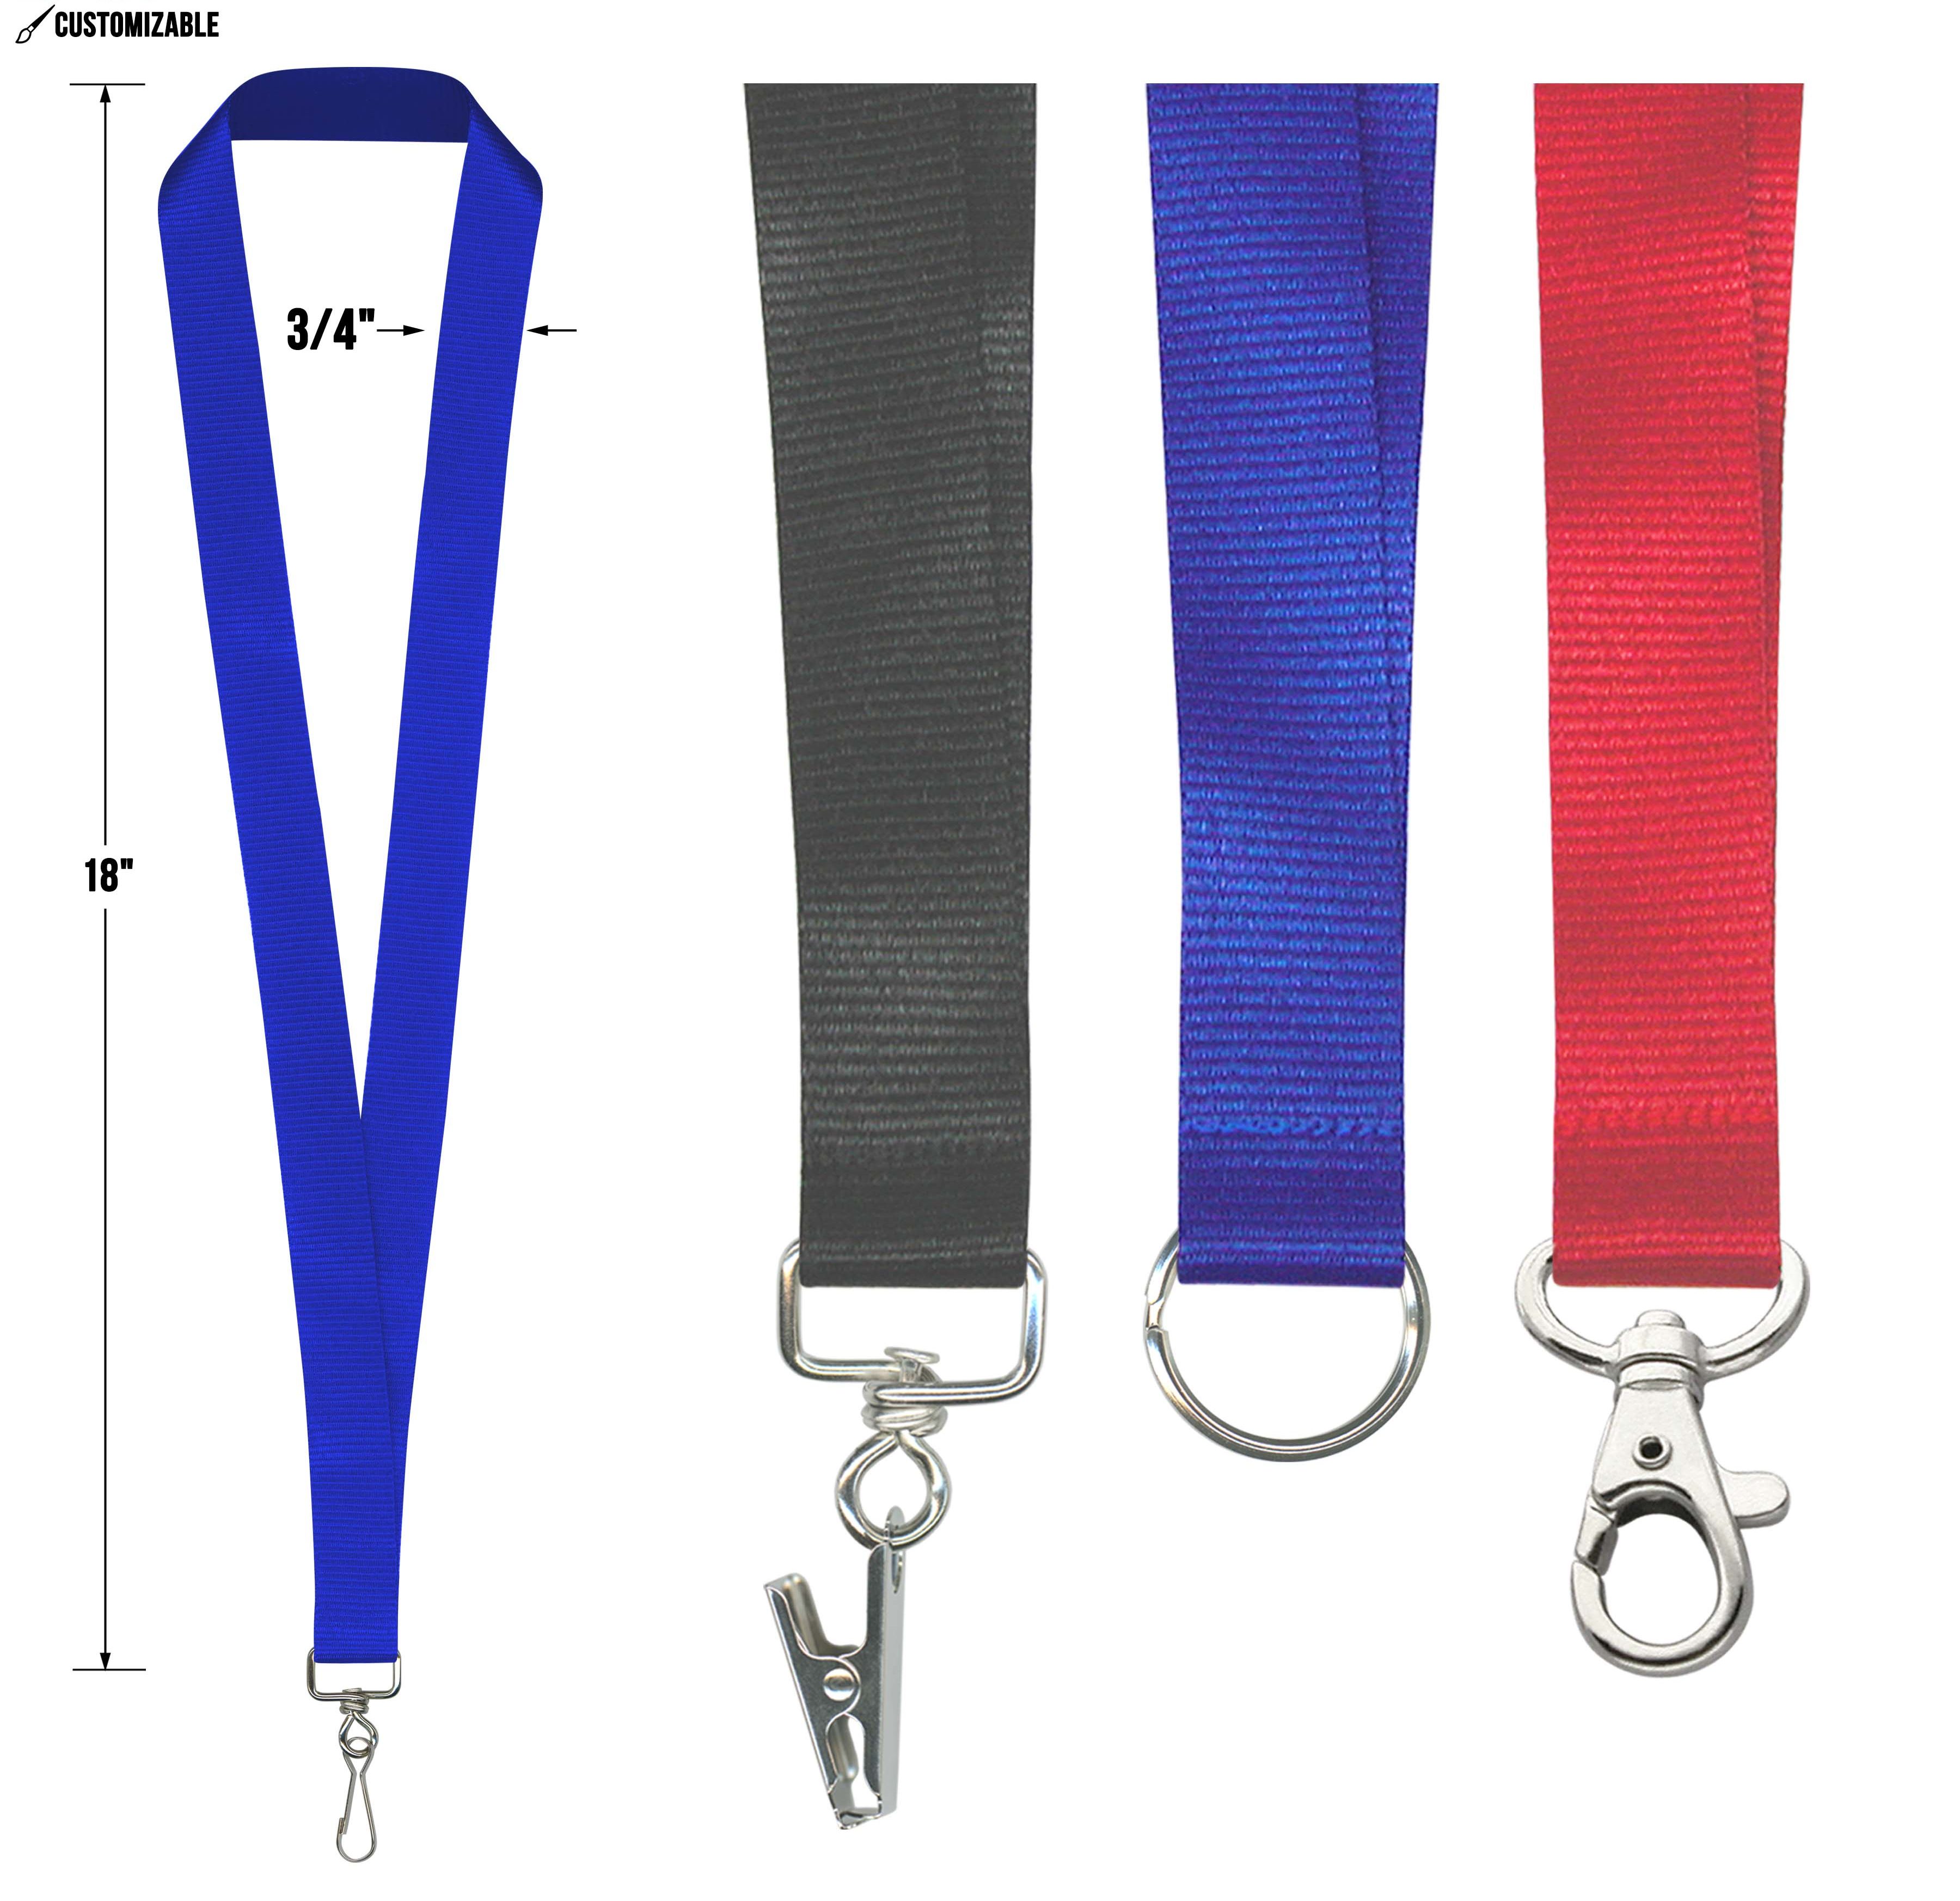 Customizable Solid Color Lanyards 3/4" x 36" - Perfect for Events | Choose from 14 Colors & 4 Hardware Attachments